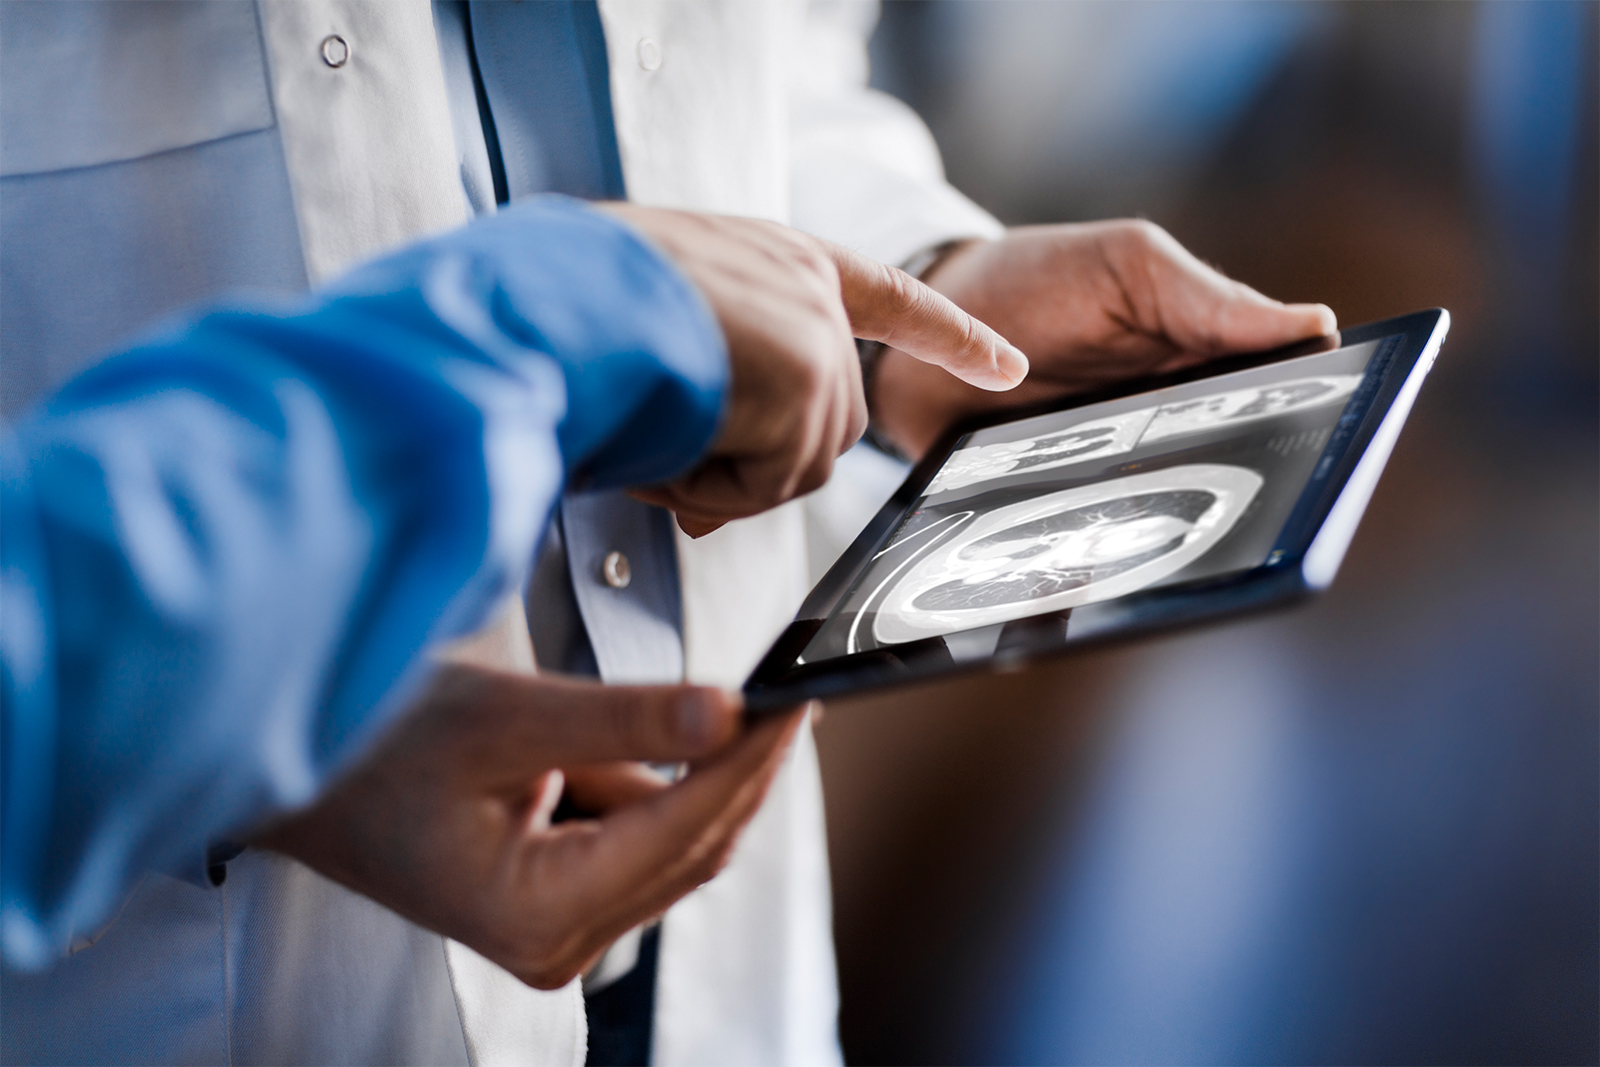 Close-up of a doctor showing a colleague or patient medical images on a tablet using Sectra UniView.